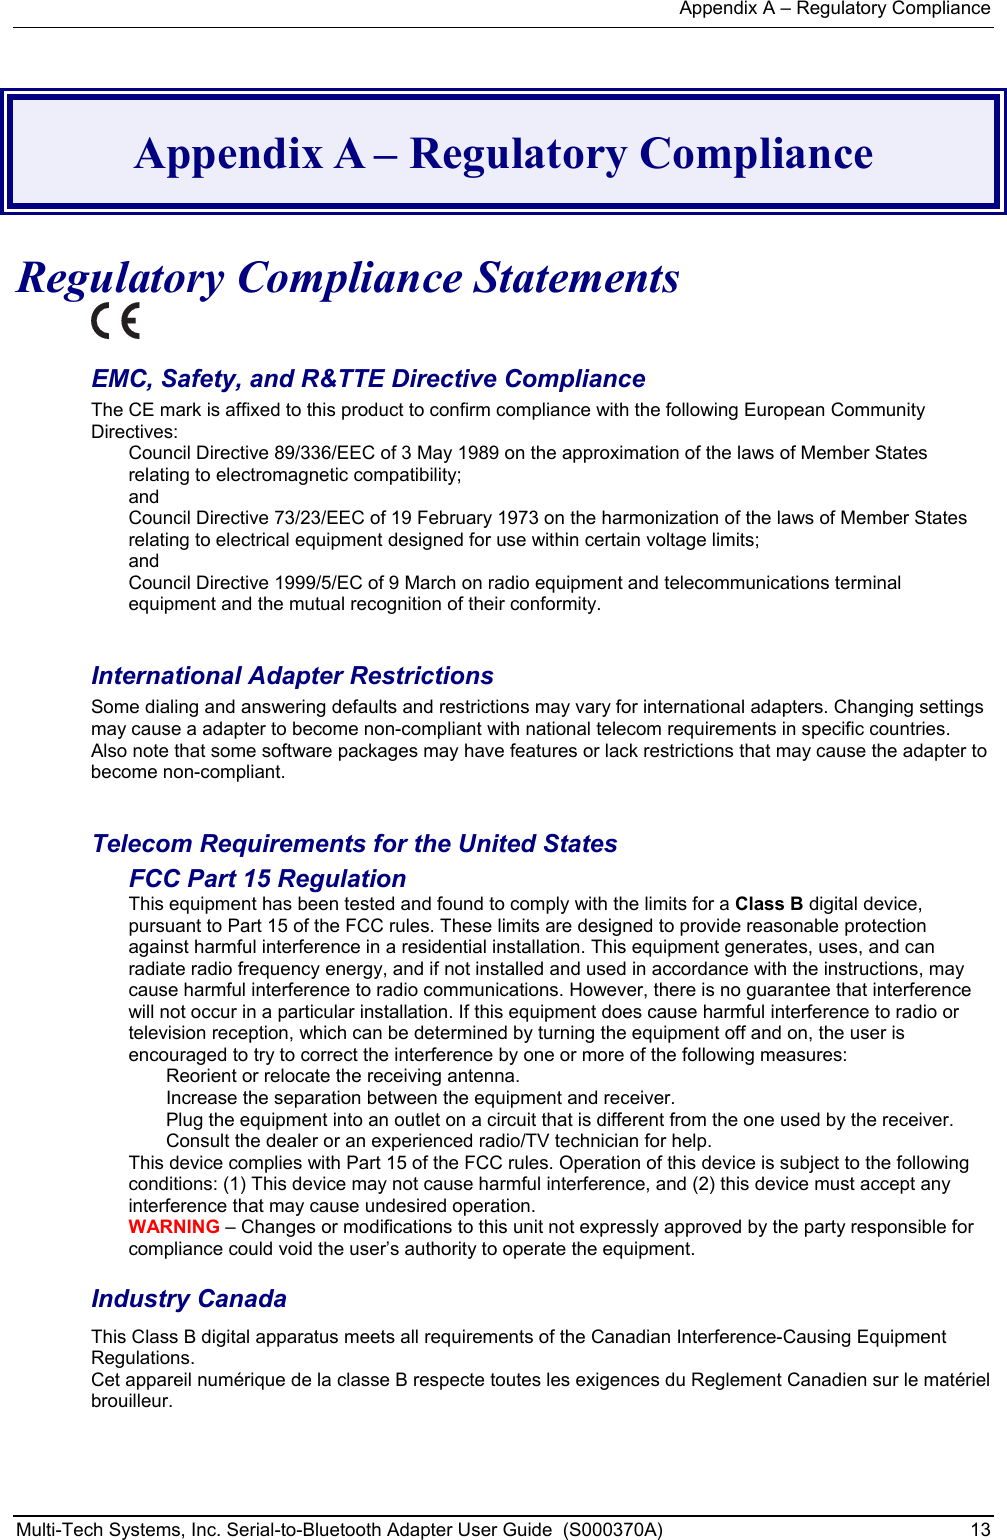 Appendix A – Regulatory Compliance Multi-Tech Systems, Inc. Serial-to-Bluetooth Adapter User Guide  (S000370A)  13   Appendix A – Regulatory Compliance  Regulatory Compliance Statements  EMC, Safety, and R&amp;TTE Directive Compliance The CE mark is affixed to this product to confirm compliance with the following European Community Directives: Council Directive 89/336/EEC of 3 May 1989 on the approximation of the laws of Member States relating to electromagnetic compatibility;  and Council Directive 73/23/EEC of 19 February 1973 on the harmonization of the laws of Member States relating to electrical equipment designed for use within certain voltage limits; and Council Directive 1999/5/EC of 9 March on radio equipment and telecommunications terminal equipment and the mutual recognition of their conformity.   International Adapter Restrictions Some dialing and answering defaults and restrictions may vary for international adapters. Changing settings may cause a adapter to become non-compliant with national telecom requirements in specific countries. Also note that some software packages may have features or lack restrictions that may cause the adapter to become non-compliant.  Telecom Requirements for the United States FCC Part 15 Regulation This equipment has been tested and found to comply with the limits for a Class B digital device, pursuant to Part 15 of the FCC rules. These limits are designed to provide reasonable protection against harmful interference in a residential installation. This equipment generates, uses, and can radiate radio frequency energy, and if not installed and used in accordance with the instructions, may cause harmful interference to radio communications. However, there is no guarantee that interference will not occur in a particular installation. If this equipment does cause harmful interference to radio or television reception, which can be determined by turning the equipment off and on, the user is encouraged to try to correct the interference by one or more of the following measures: Reorient or relocate the receiving antenna. Increase the separation between the equipment and receiver. Plug the equipment into an outlet on a circuit that is different from the one used by the receiver. Consult the dealer or an experienced radio/TV technician for help. This device complies with Part 15 of the FCC rules. Operation of this device is subject to the following conditions: (1) This device may not cause harmful interference, and (2) this device must accept any interference that may cause undesired operation. WARNING – Changes or modifications to this unit not expressly approved by the party responsible for compliance could void the user’s authority to operate the equipment. Industry Canada This Class B digital apparatus meets all requirements of the Canadian Interference-Causing Equipment Regulations. Cet appareil numérique de la classe B respecte toutes les exigences du Reglement Canadien sur le matériel brouilleur. 